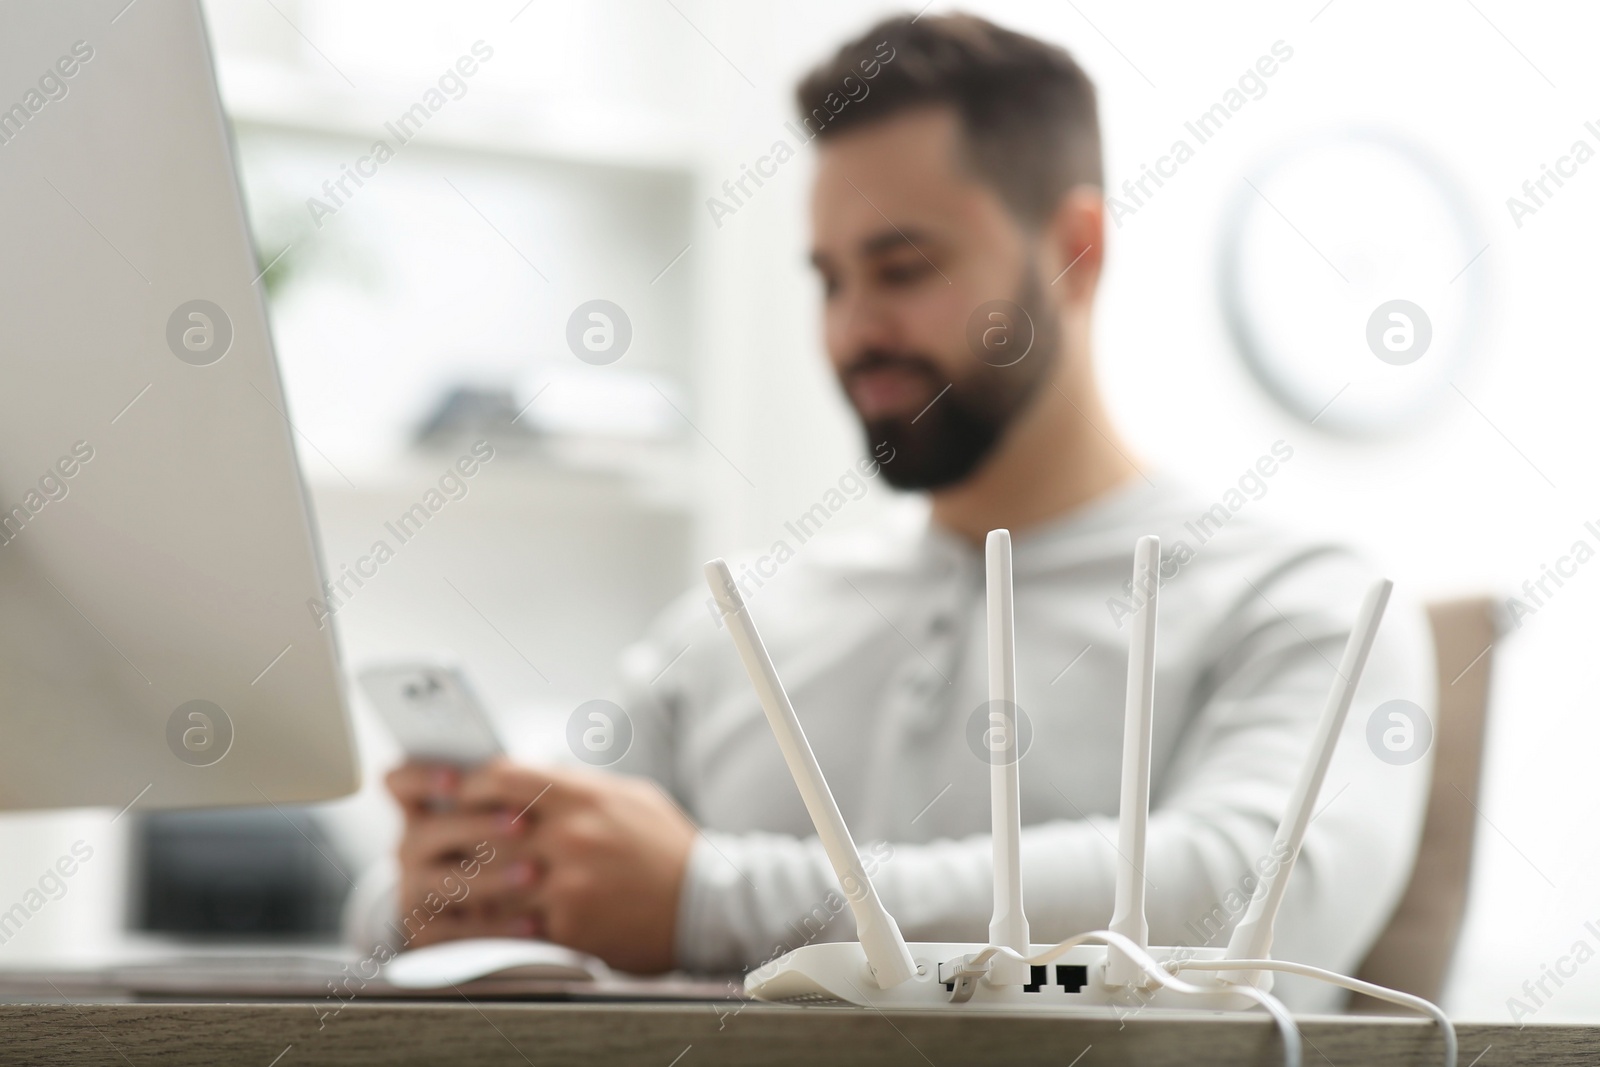 Photo of Man with smartphone working at wooden table indoors, focus on Wi-Fi router